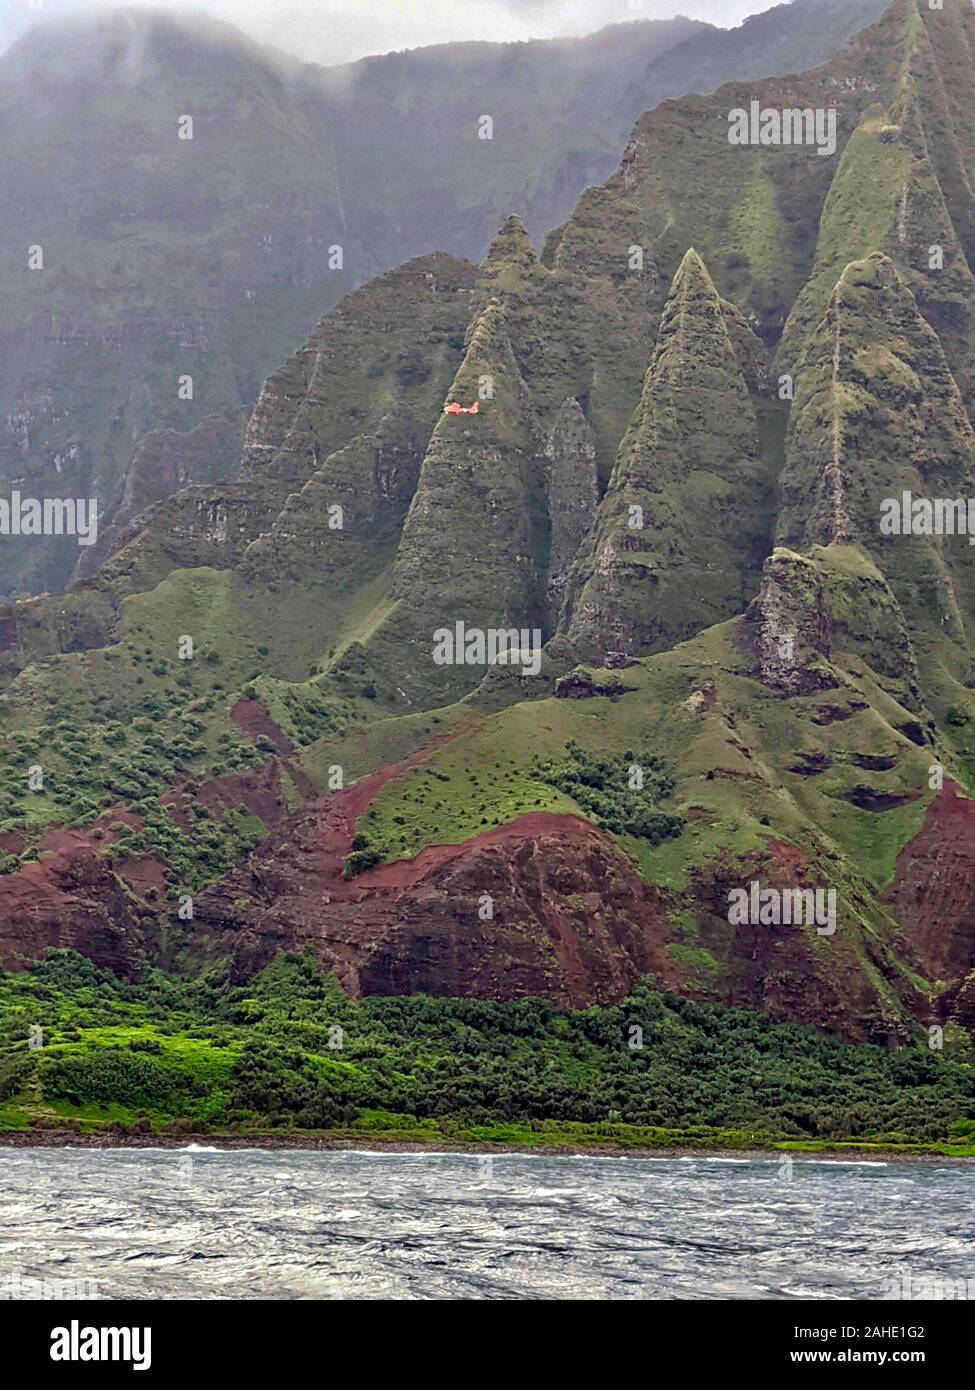 Kauai, United States of America. 27 December, 2019. An U.S. Coast Guard MH-65 Dolphin helicopter with Air Station Barbers Point searches the Na Pali coast of Kauai for a missing tour helicopter with seven people aboard December 27, 2019 in Hawaii. The flight seeing helicopter with Safari Helicopters failed to return after a short flight to view the rugged coastline.  Credit: Lt. Dan Winter/USCG/Alamy Live News Stock Photo